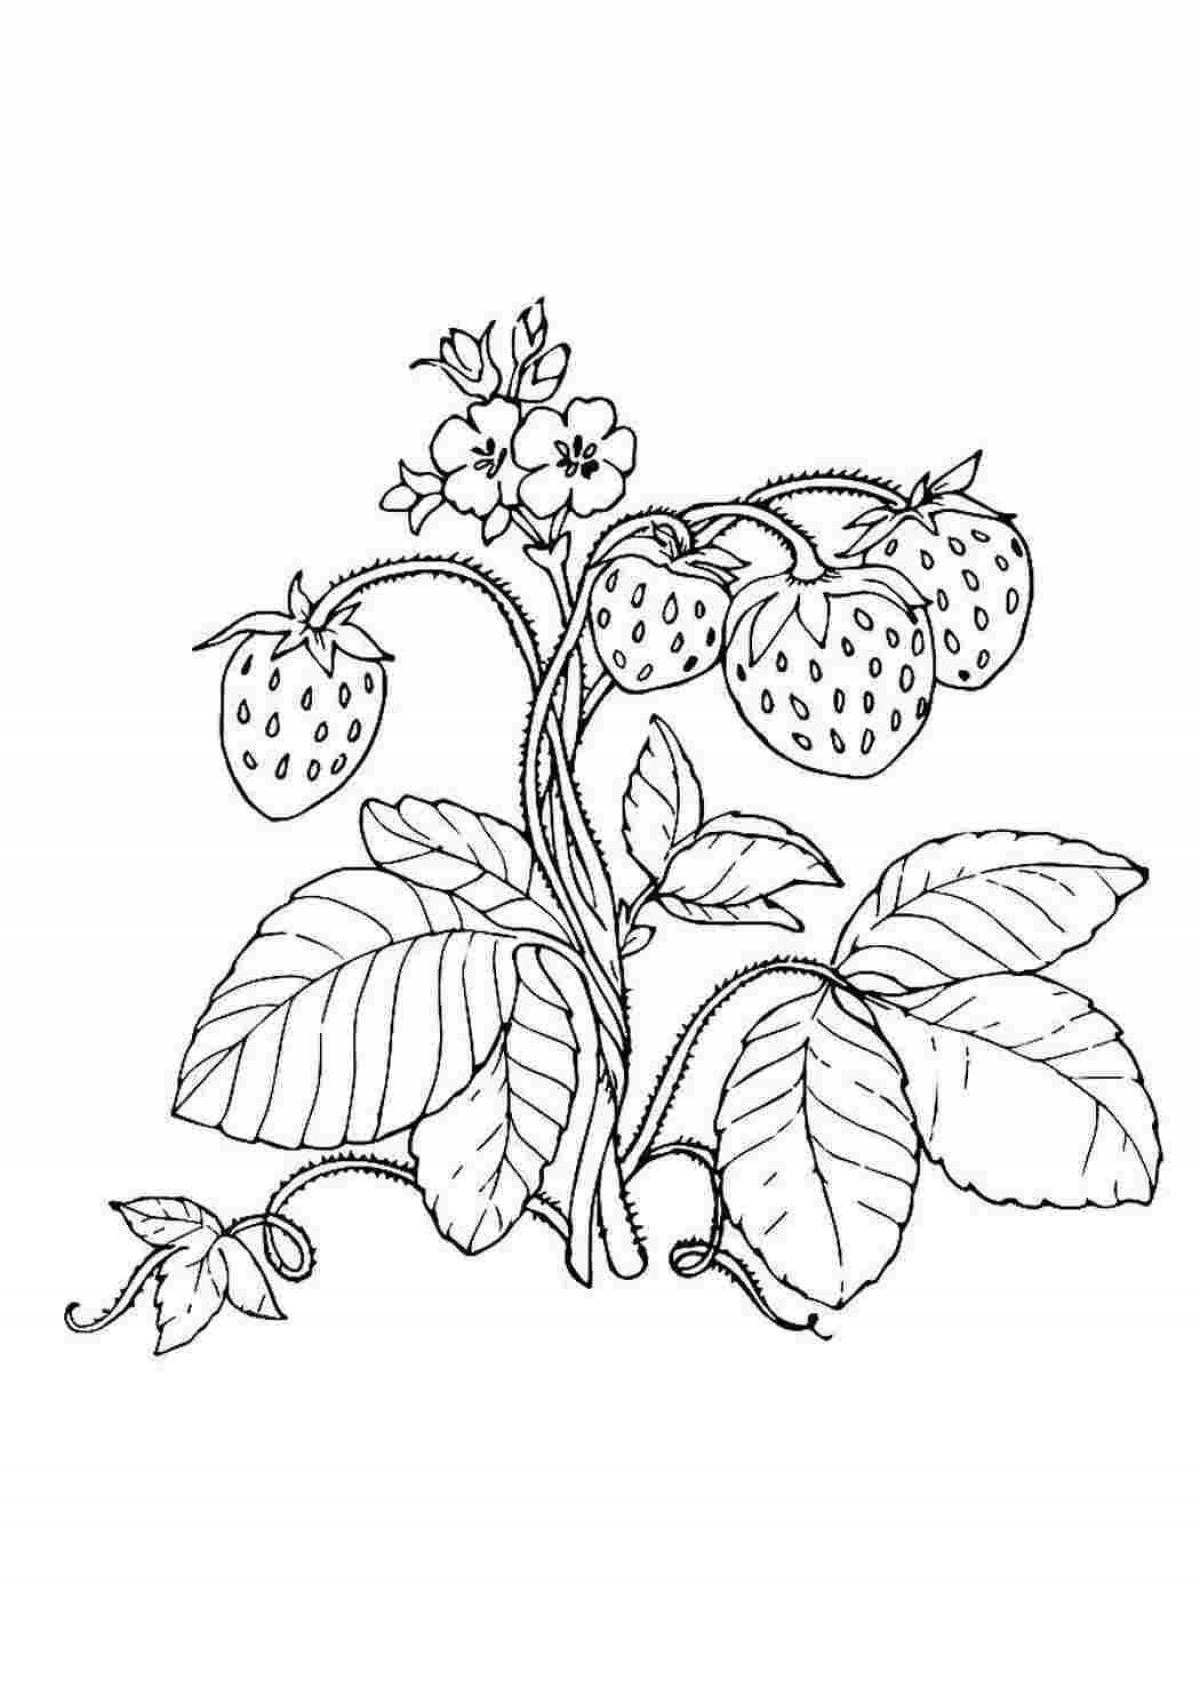 Adorable berry coloring for kids